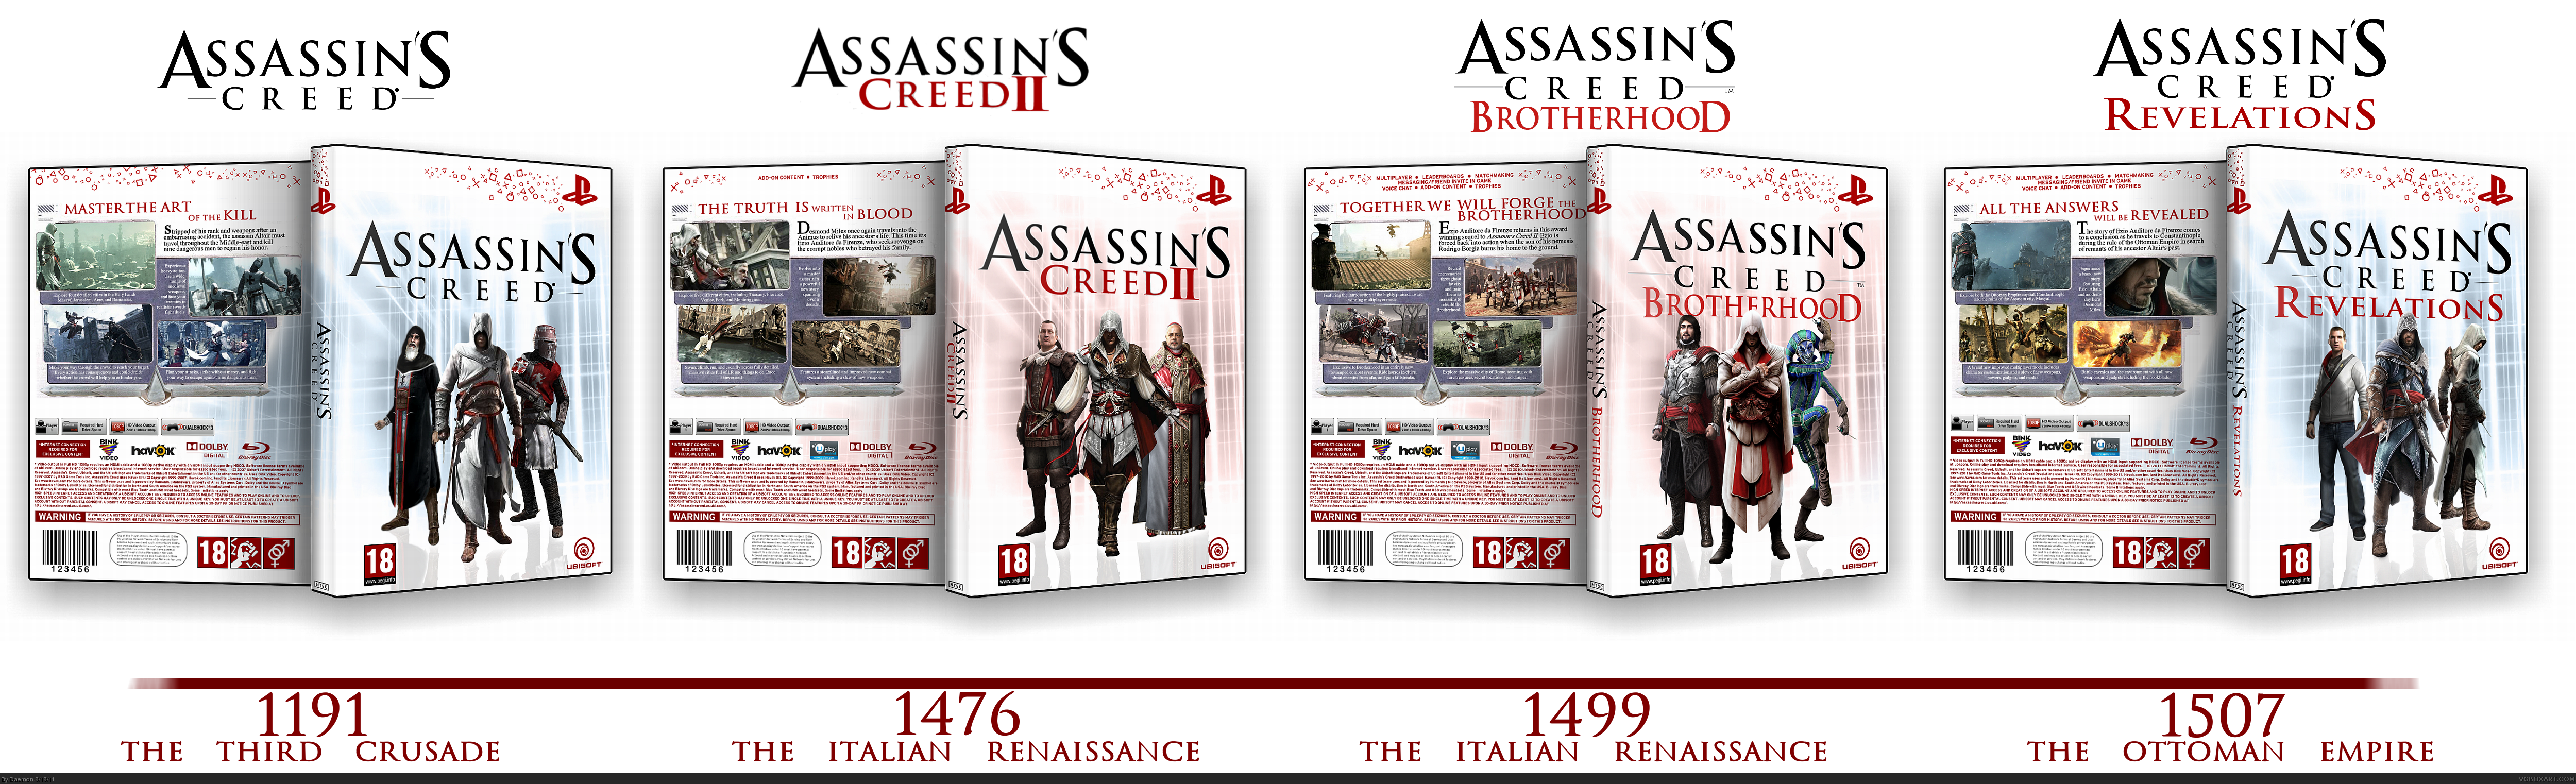 Assassin's Creed Collection box cover